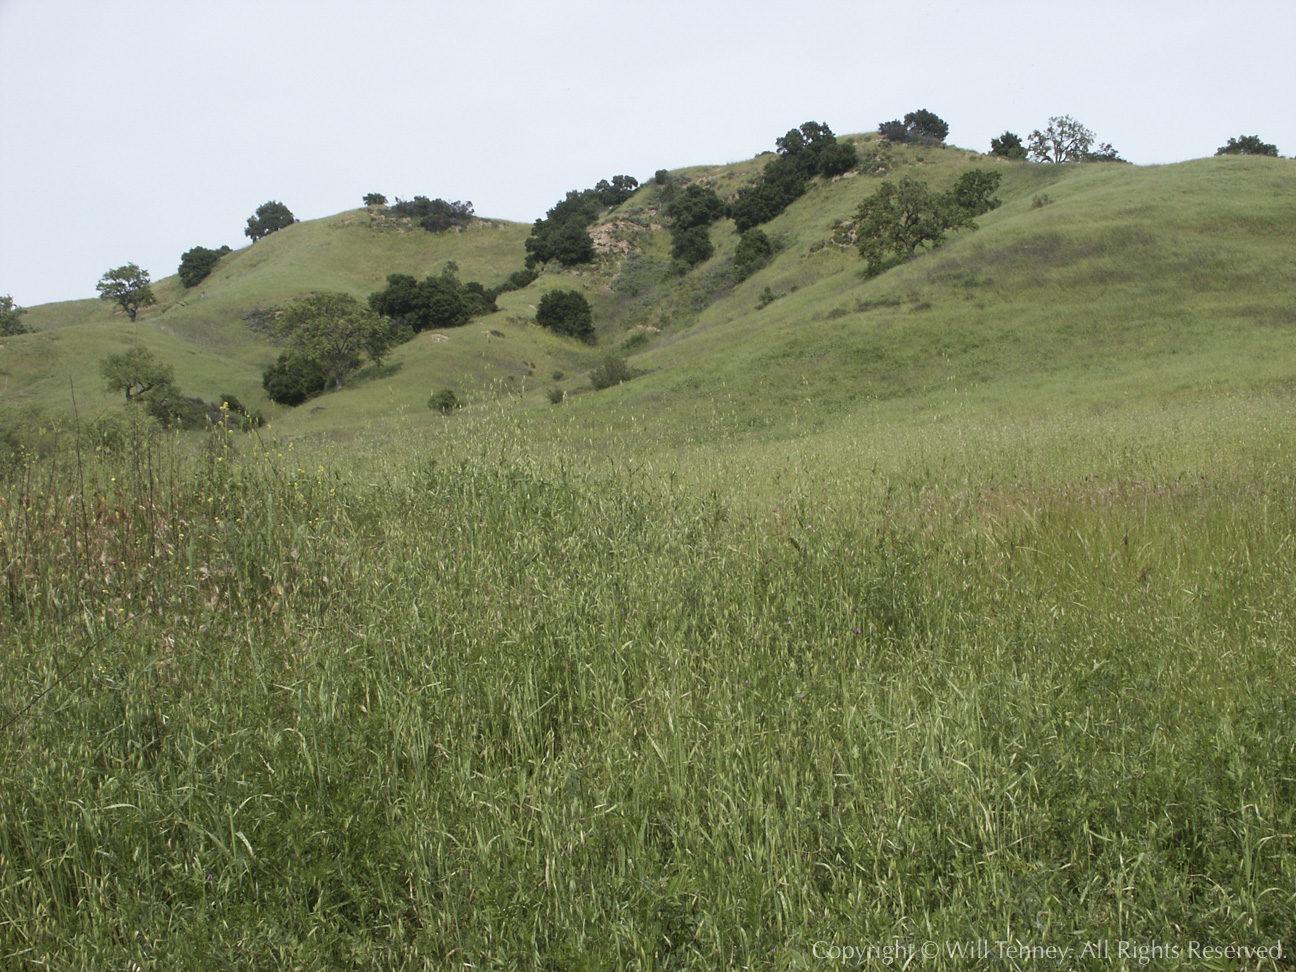 Springtime Hills: Photograph by Will Tenney